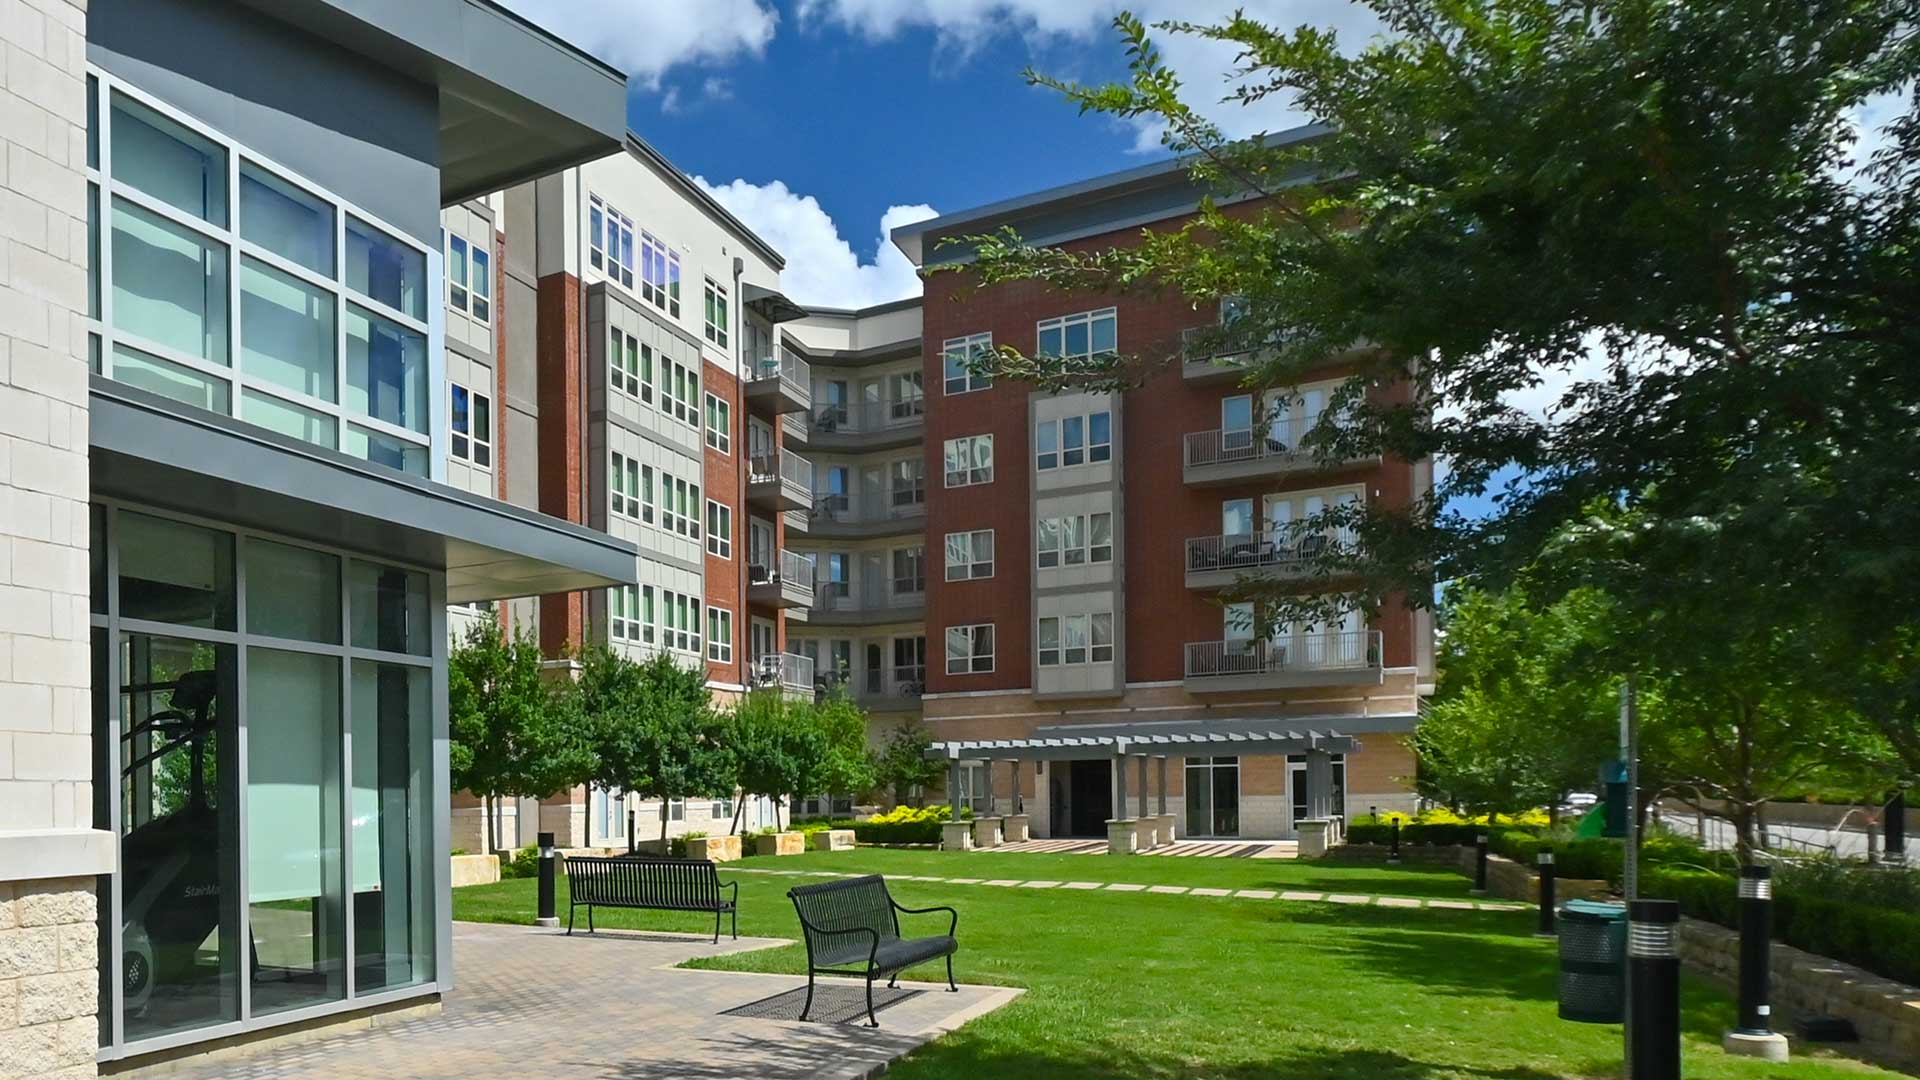 Looking across an open green space with the apartment building along the left and far side. Windows to the fitness center and a set of park benches on are to the left and trees line the right side.